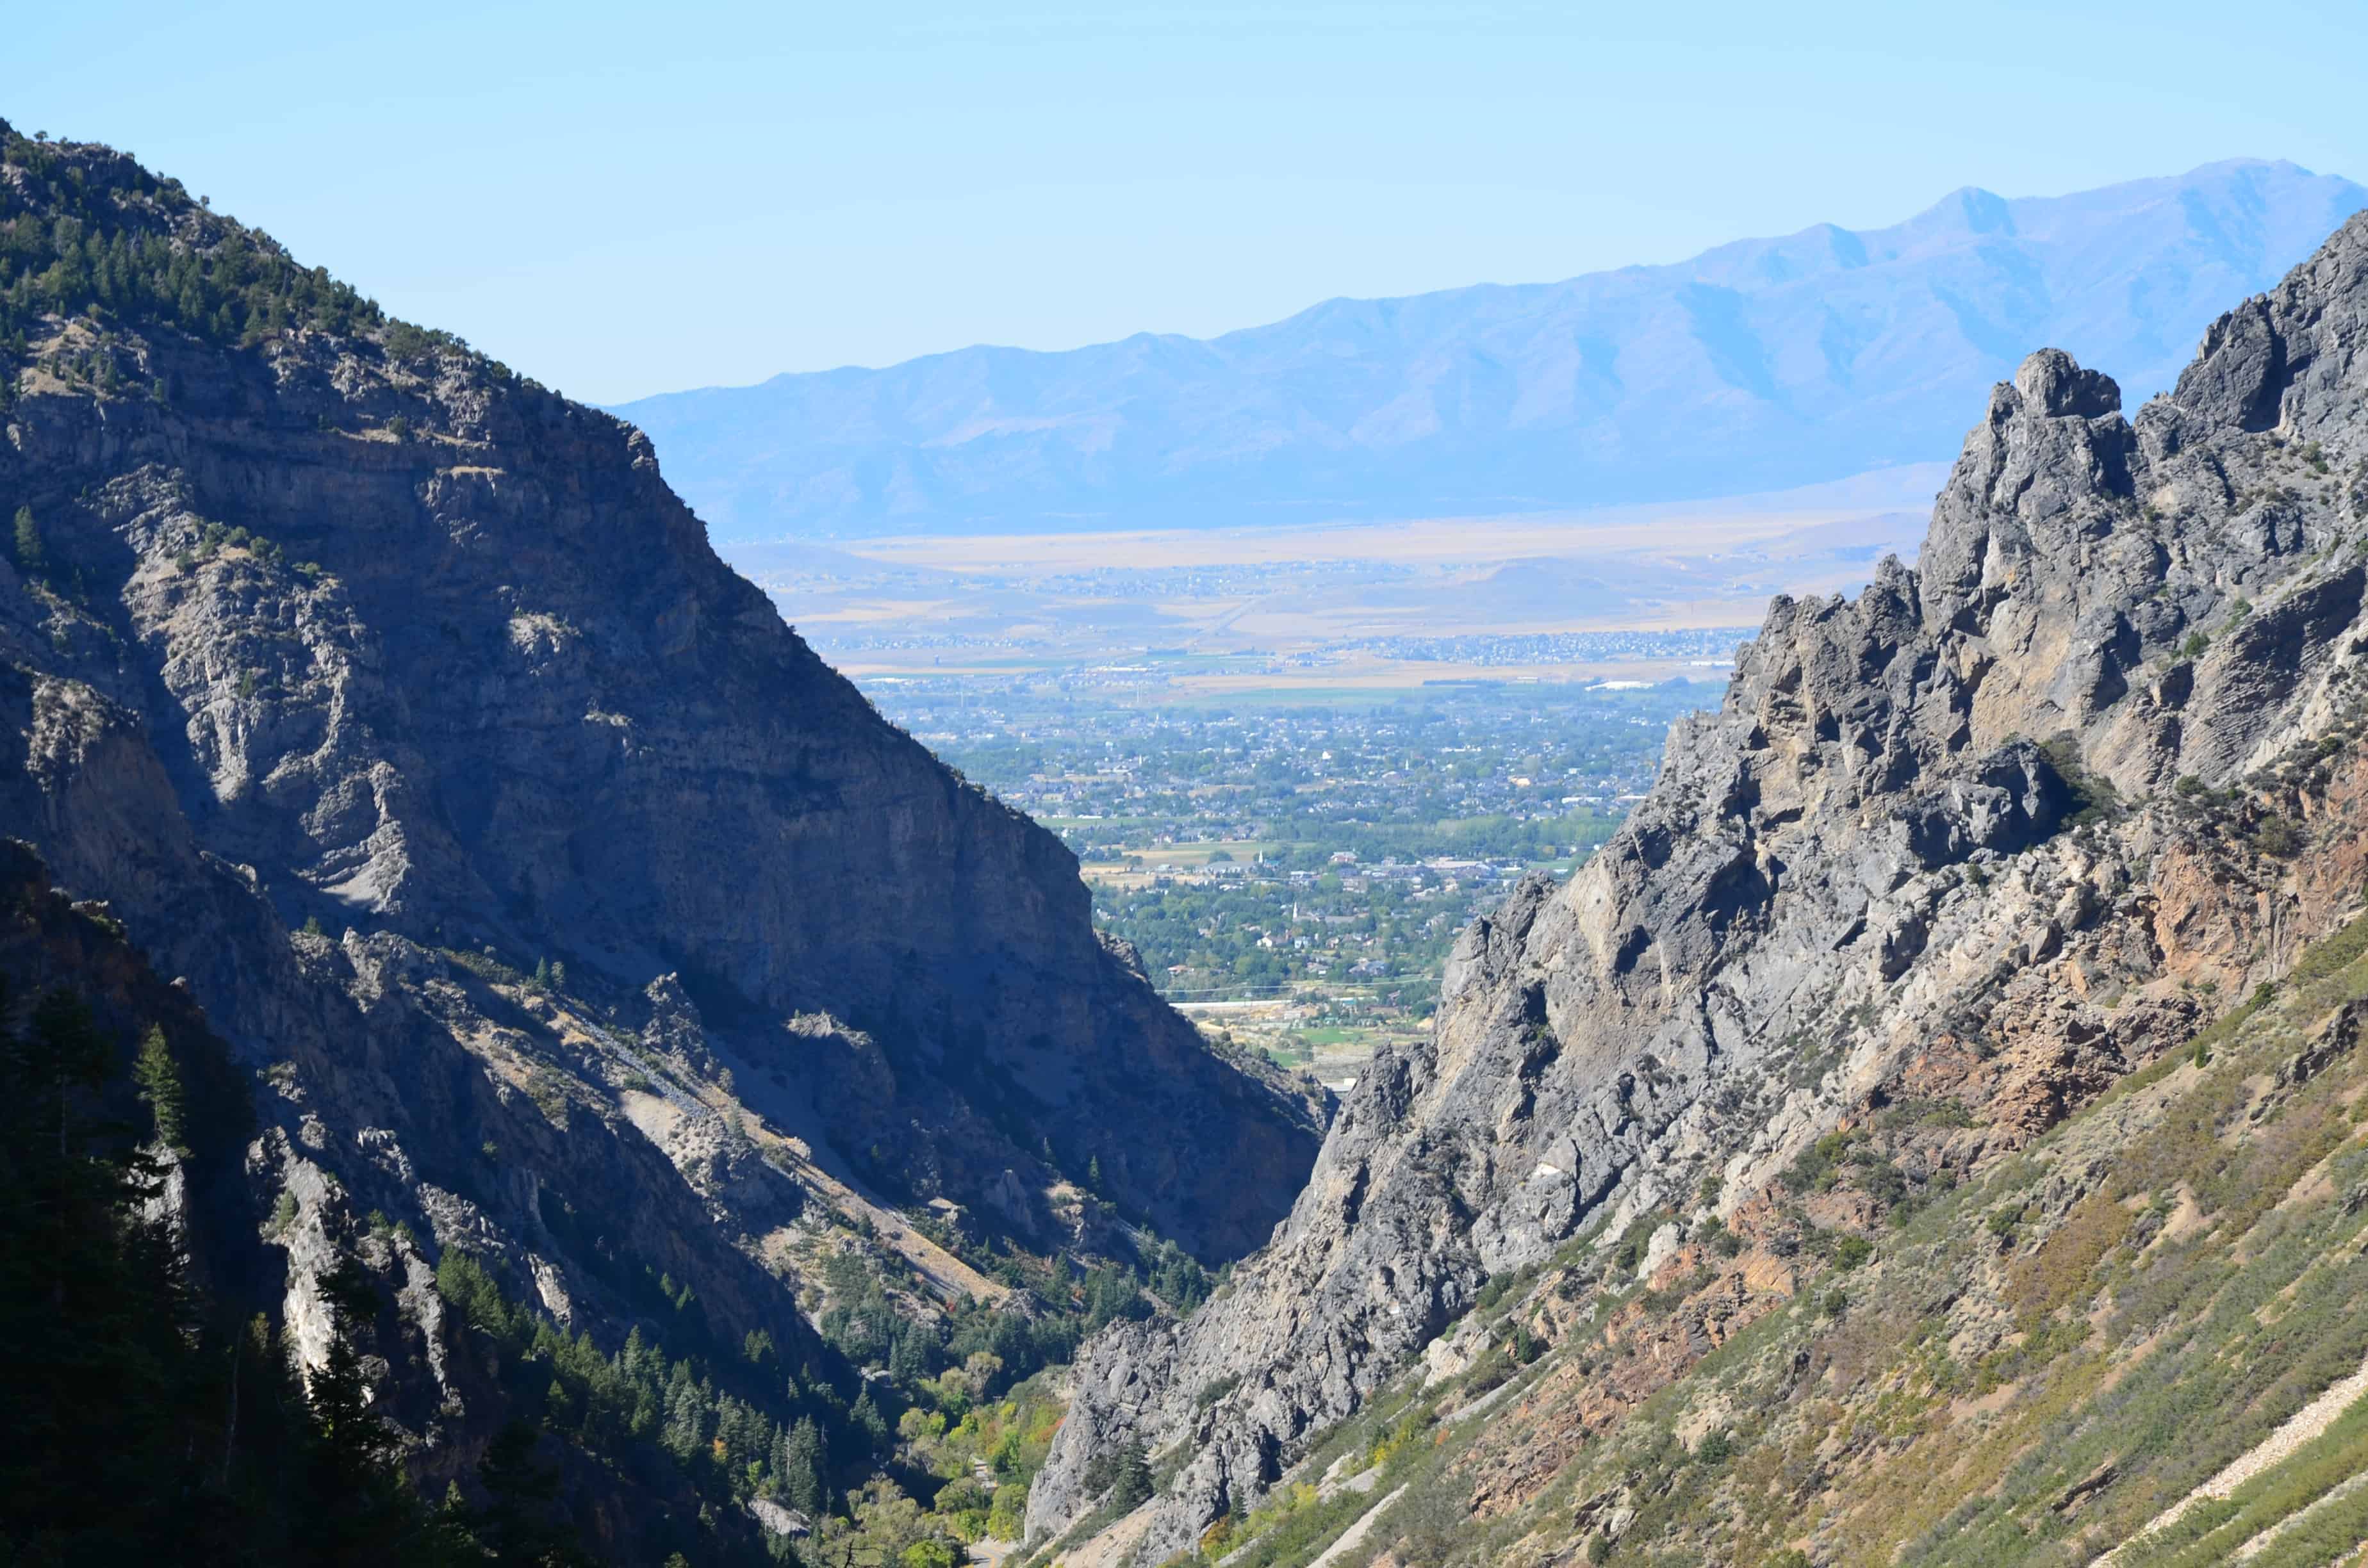 The view during the hike at Timpanogos Cave National Monument, Utah